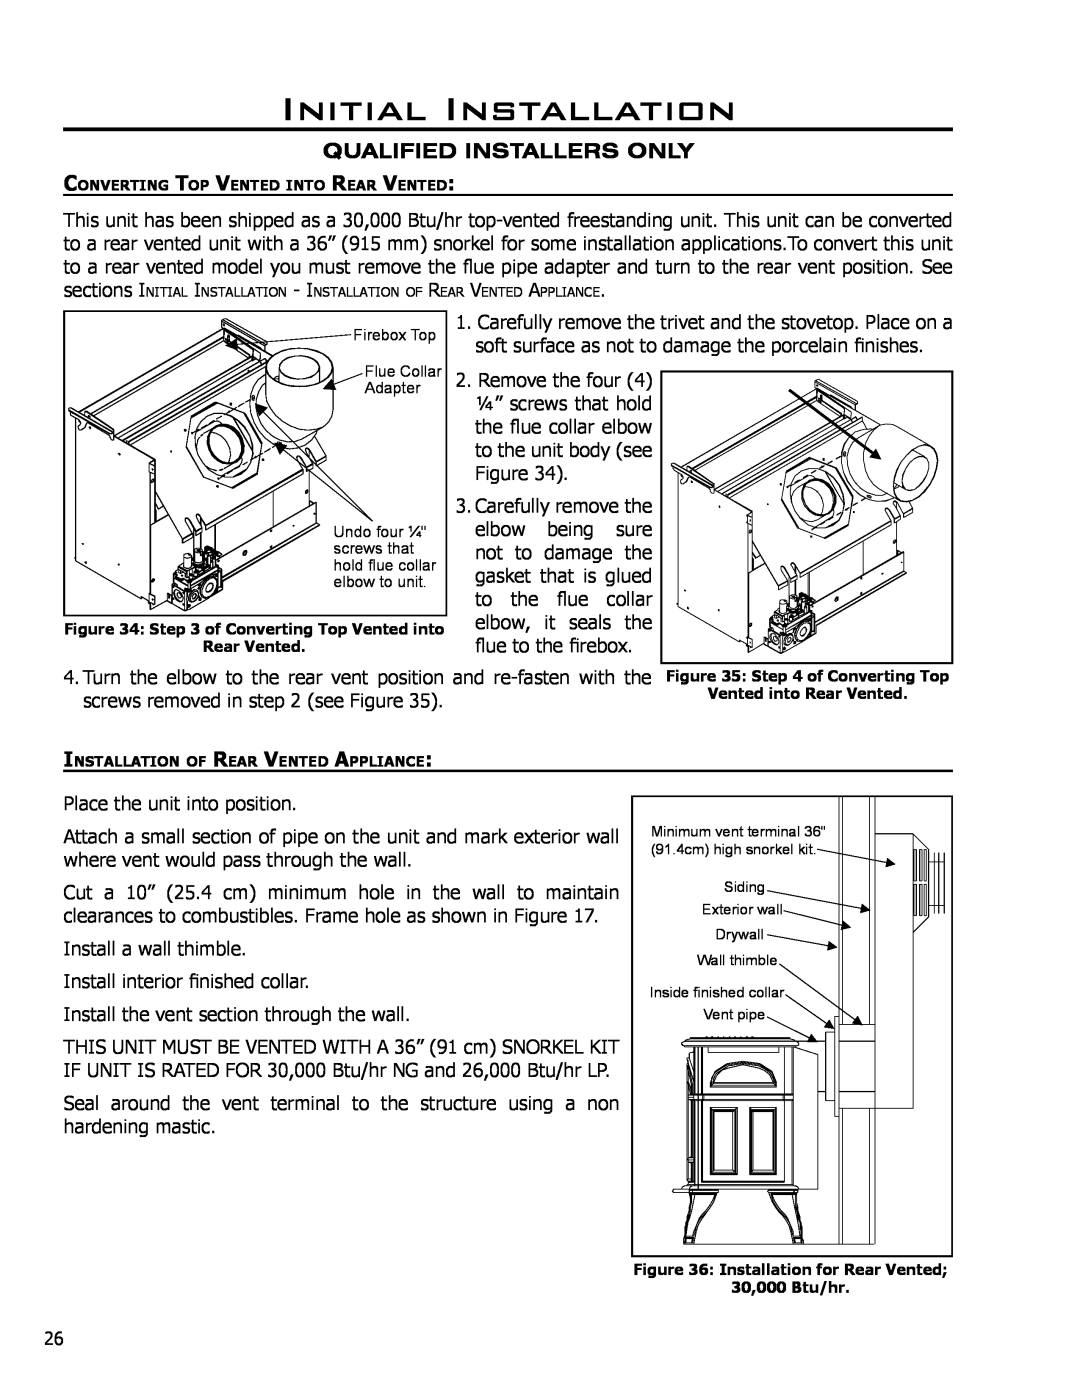 Enviro C-10794 owner manual screws removed in see Figure, Initial Installation, Qualified Installers Only 